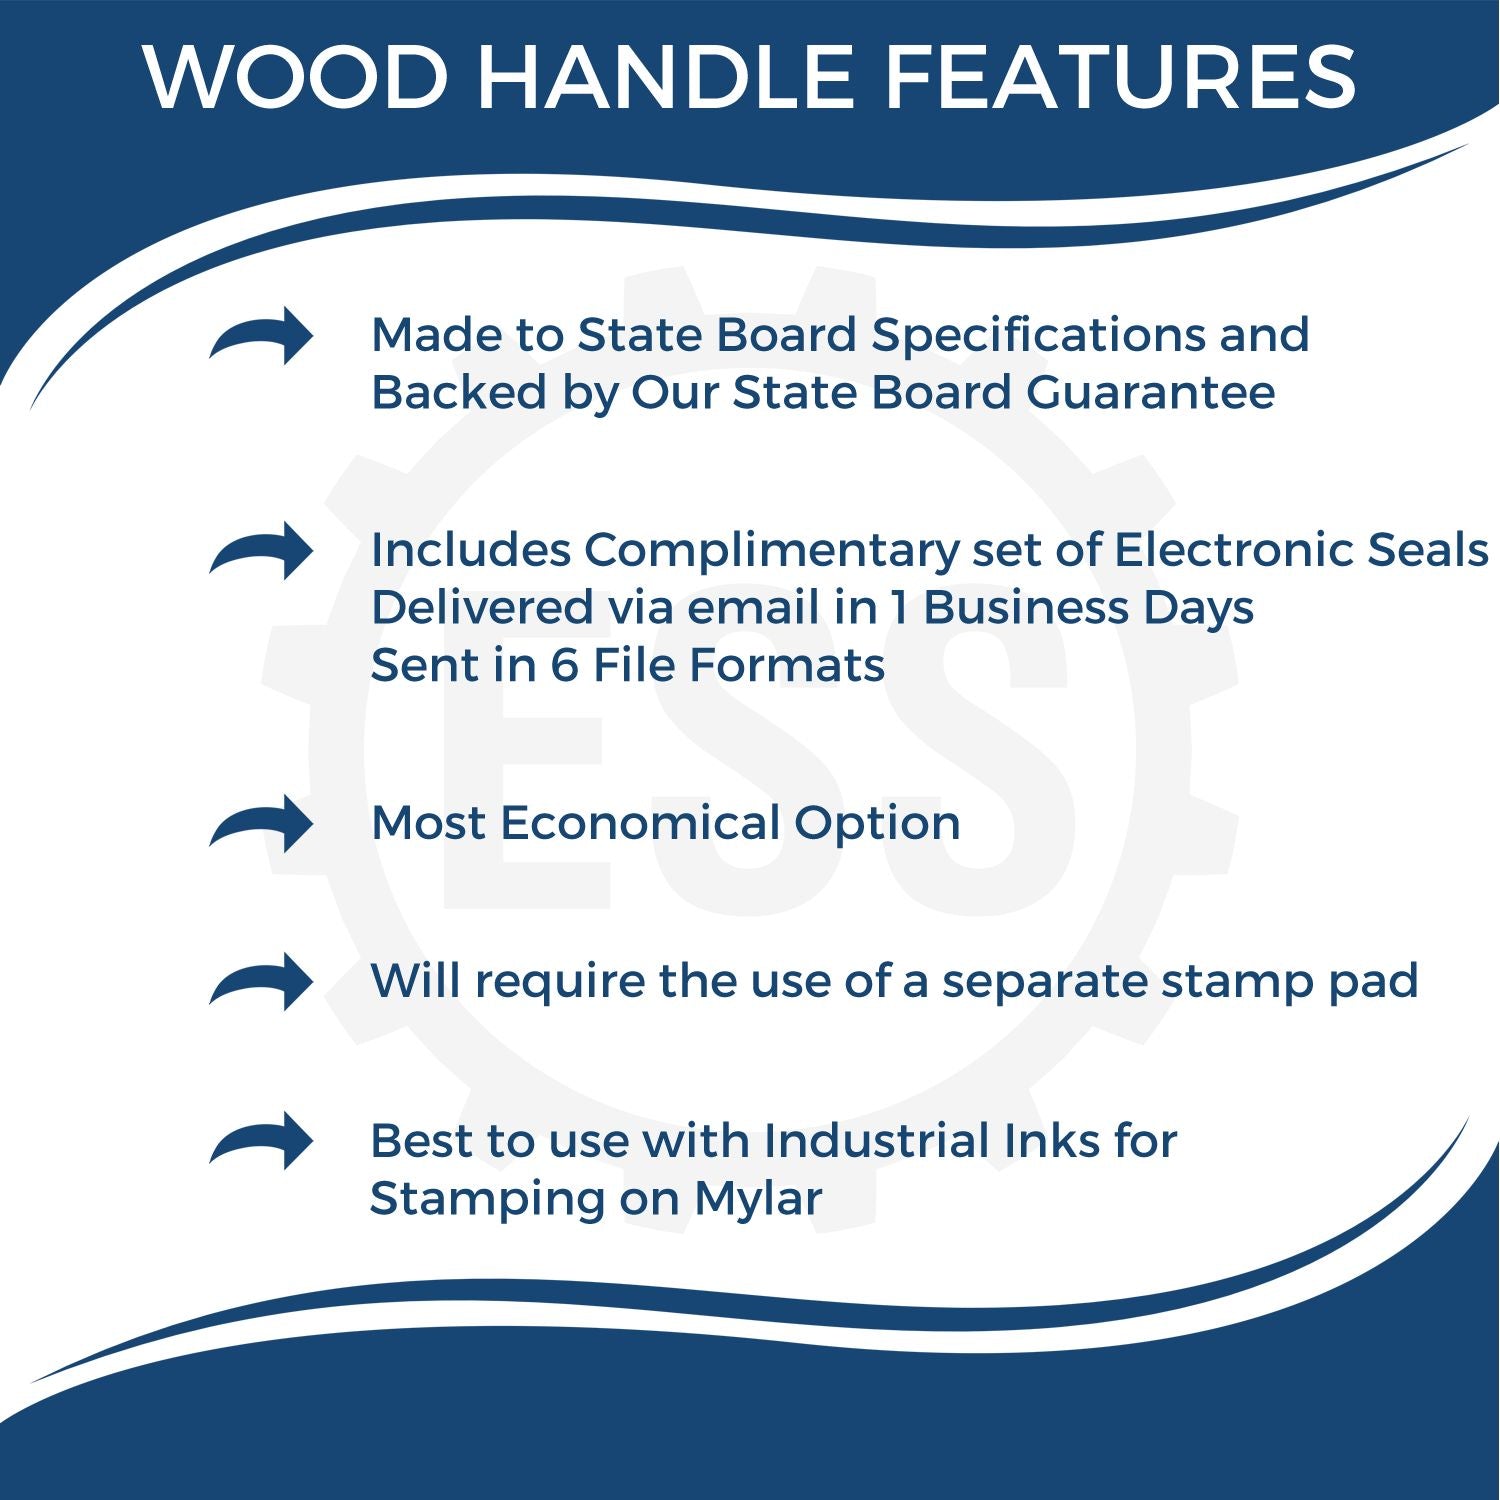 A picture of an infographic highlighting the selling points for the Wooden Handle Puerto Rico Rectangular Notary Public Stamp